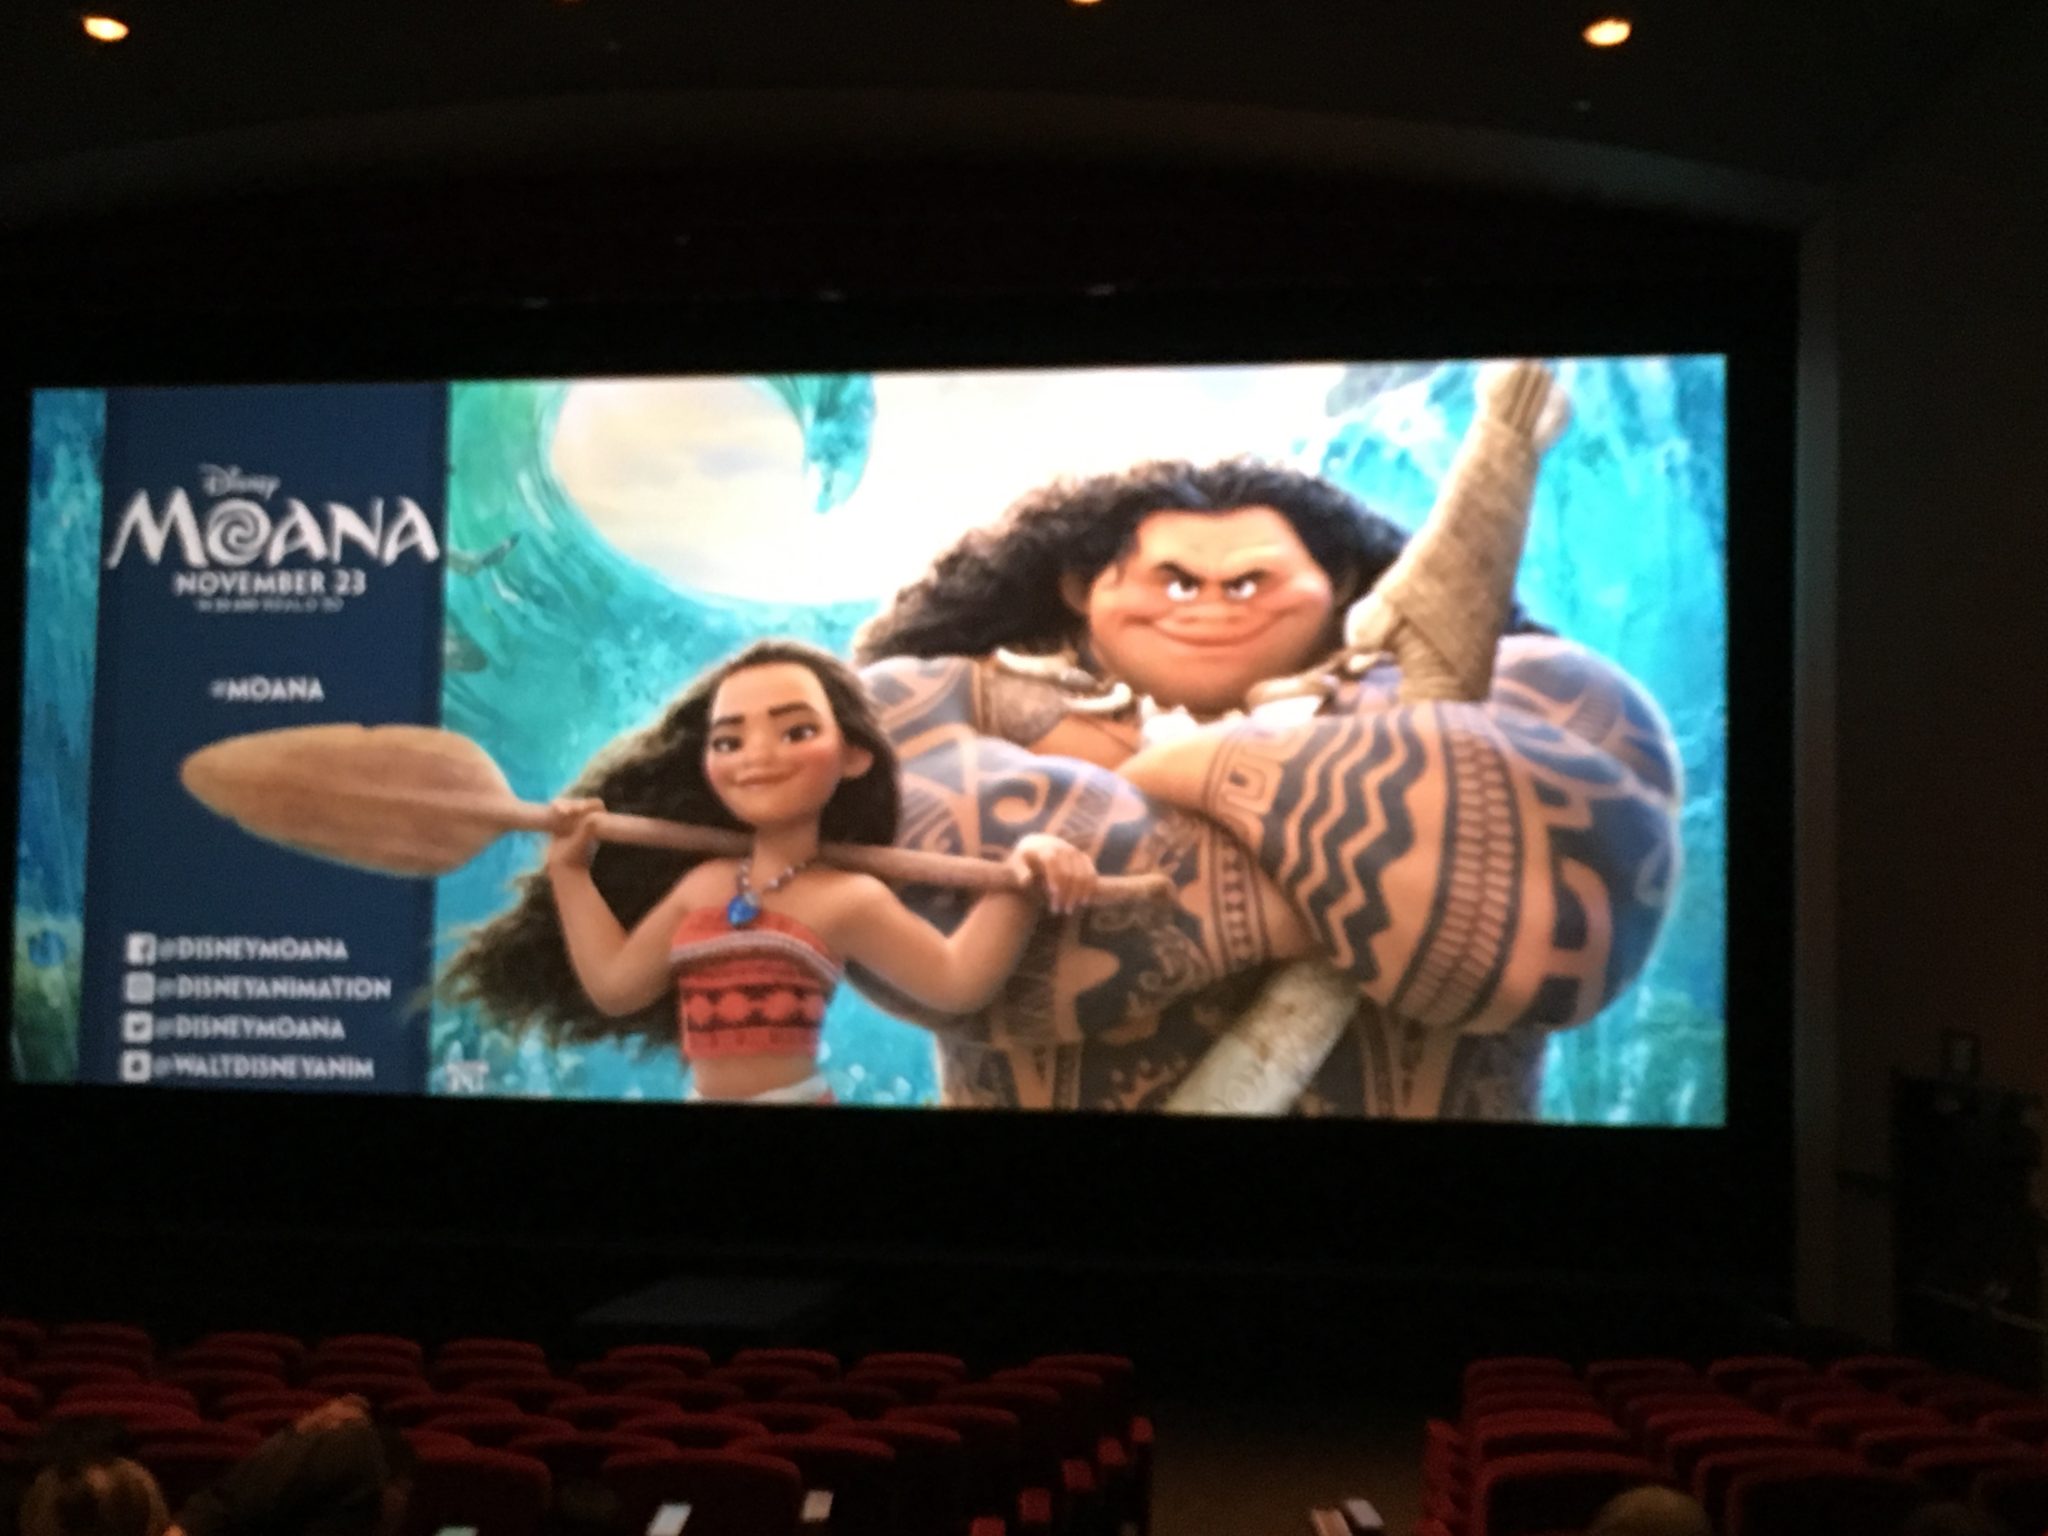 Disney’s Moana Press Conference and the things we learned